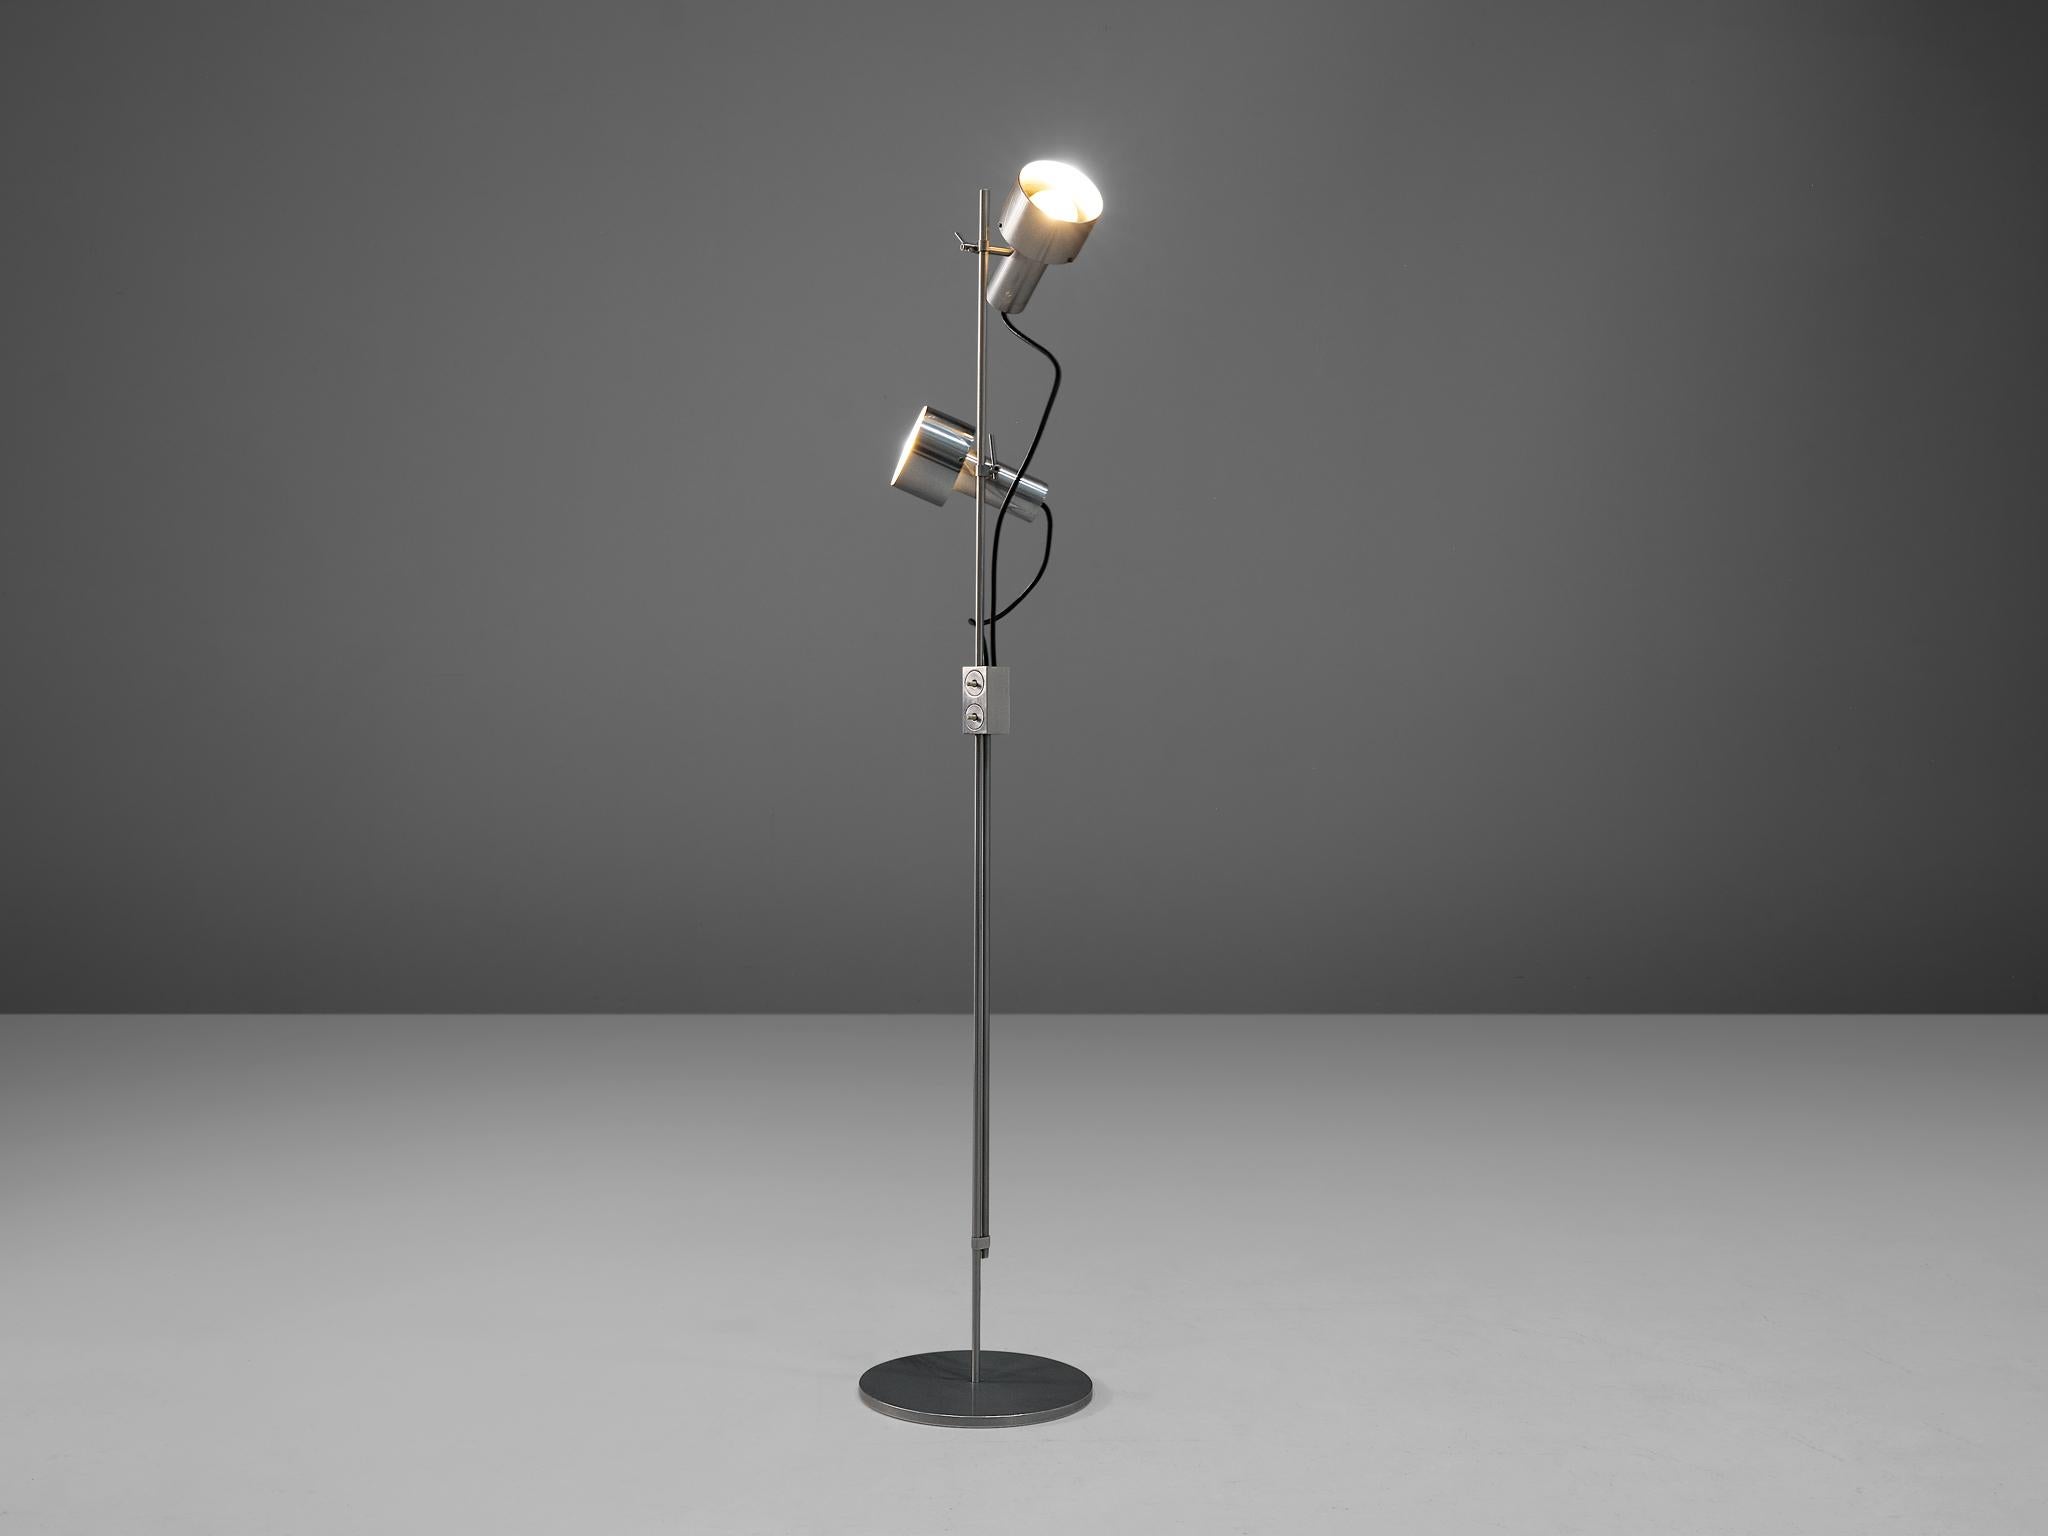 Peter Nelson for Architectural Lighting, floor lamp, aluminum, United Kingdom, 1960s

This floor lamp is a design by Peter Nelson for Architectural Lighting. The layout is characterized by a pure and minimalist aesthetic. A decoration is subordinate